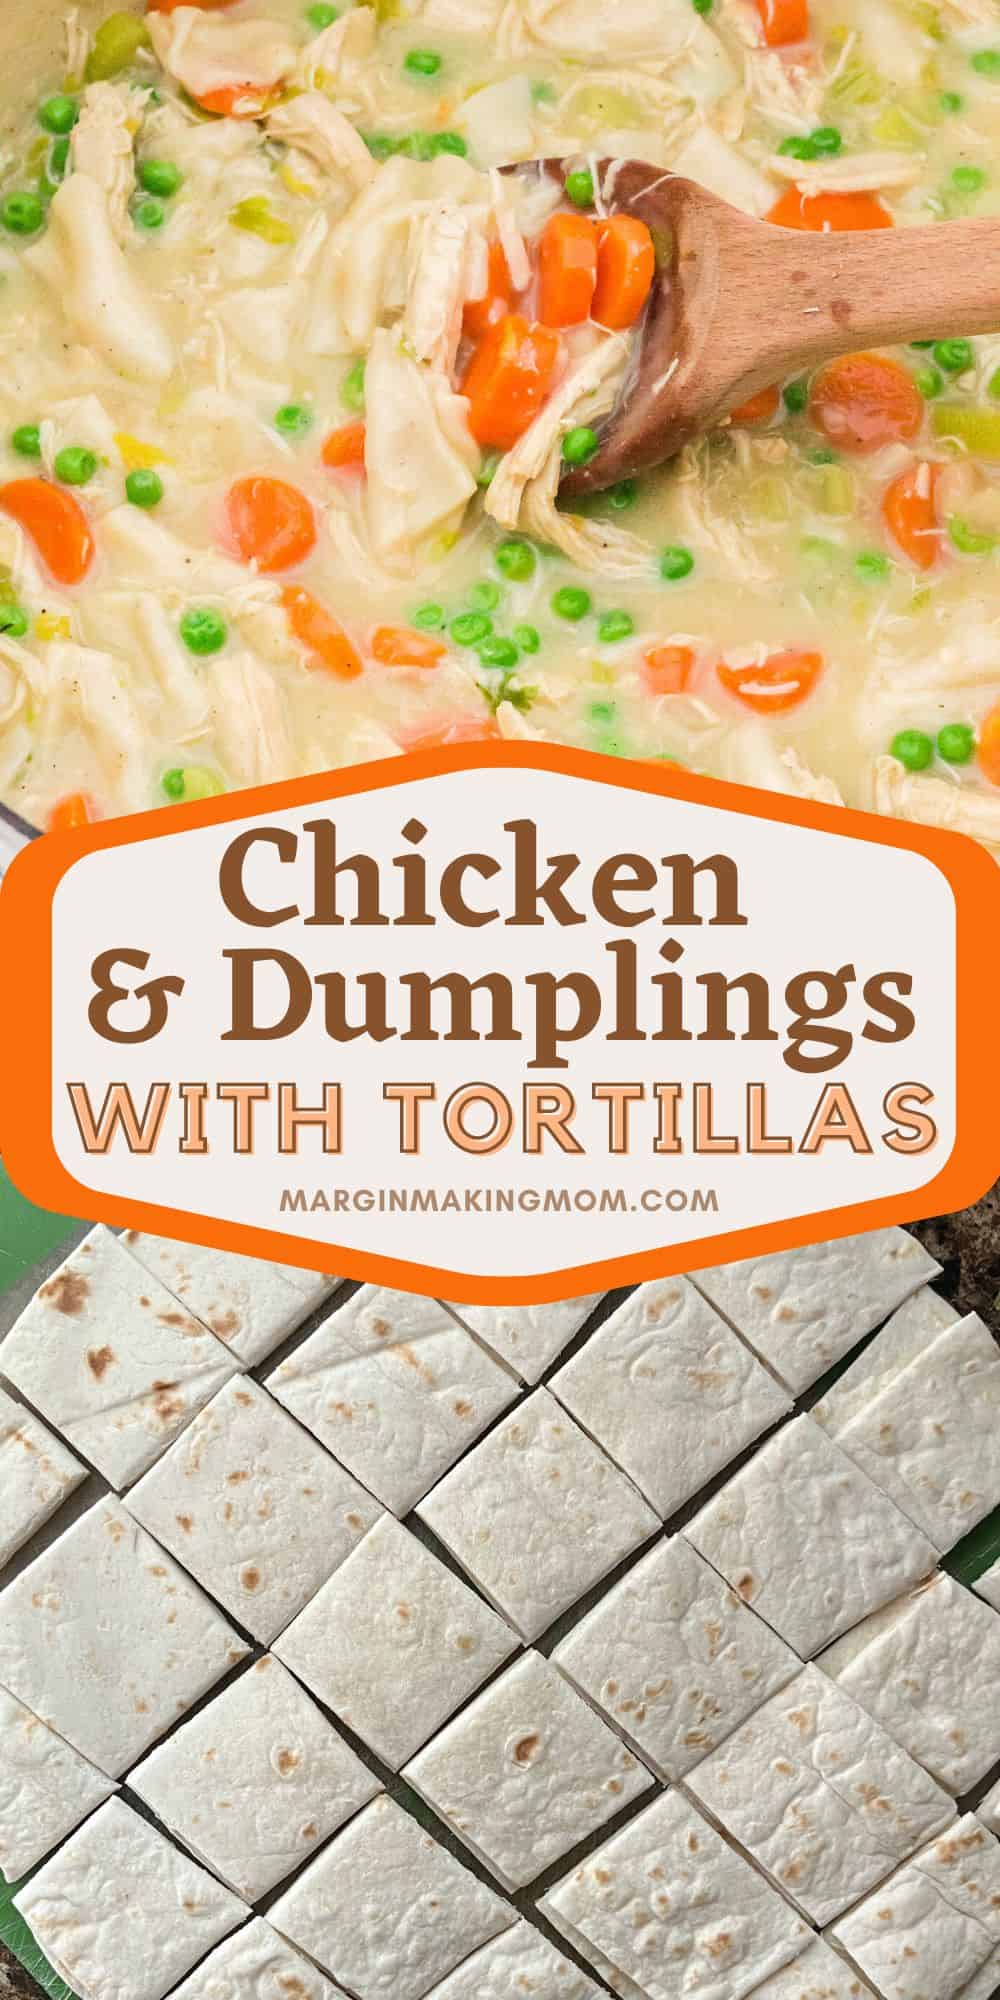 two photos; one shows a wooden spoon stirring chicken and dumplings made with tortillas. The other shows tortillas cut into squares on a cutting board.